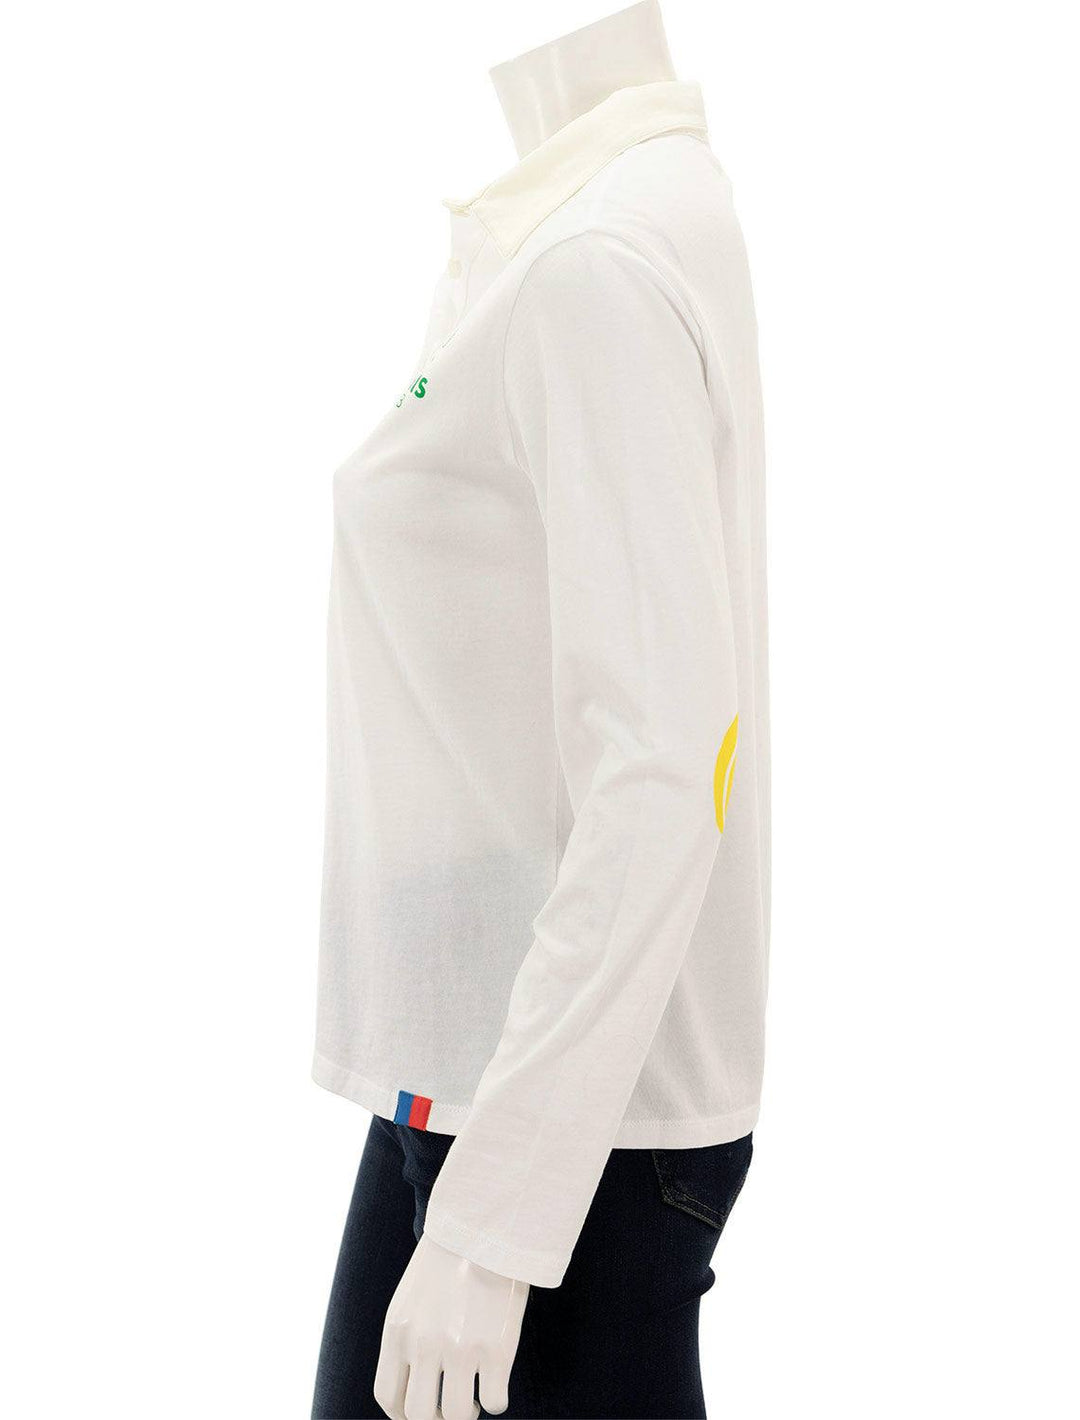 Side view of KULE's the tennis elbow polo in white.